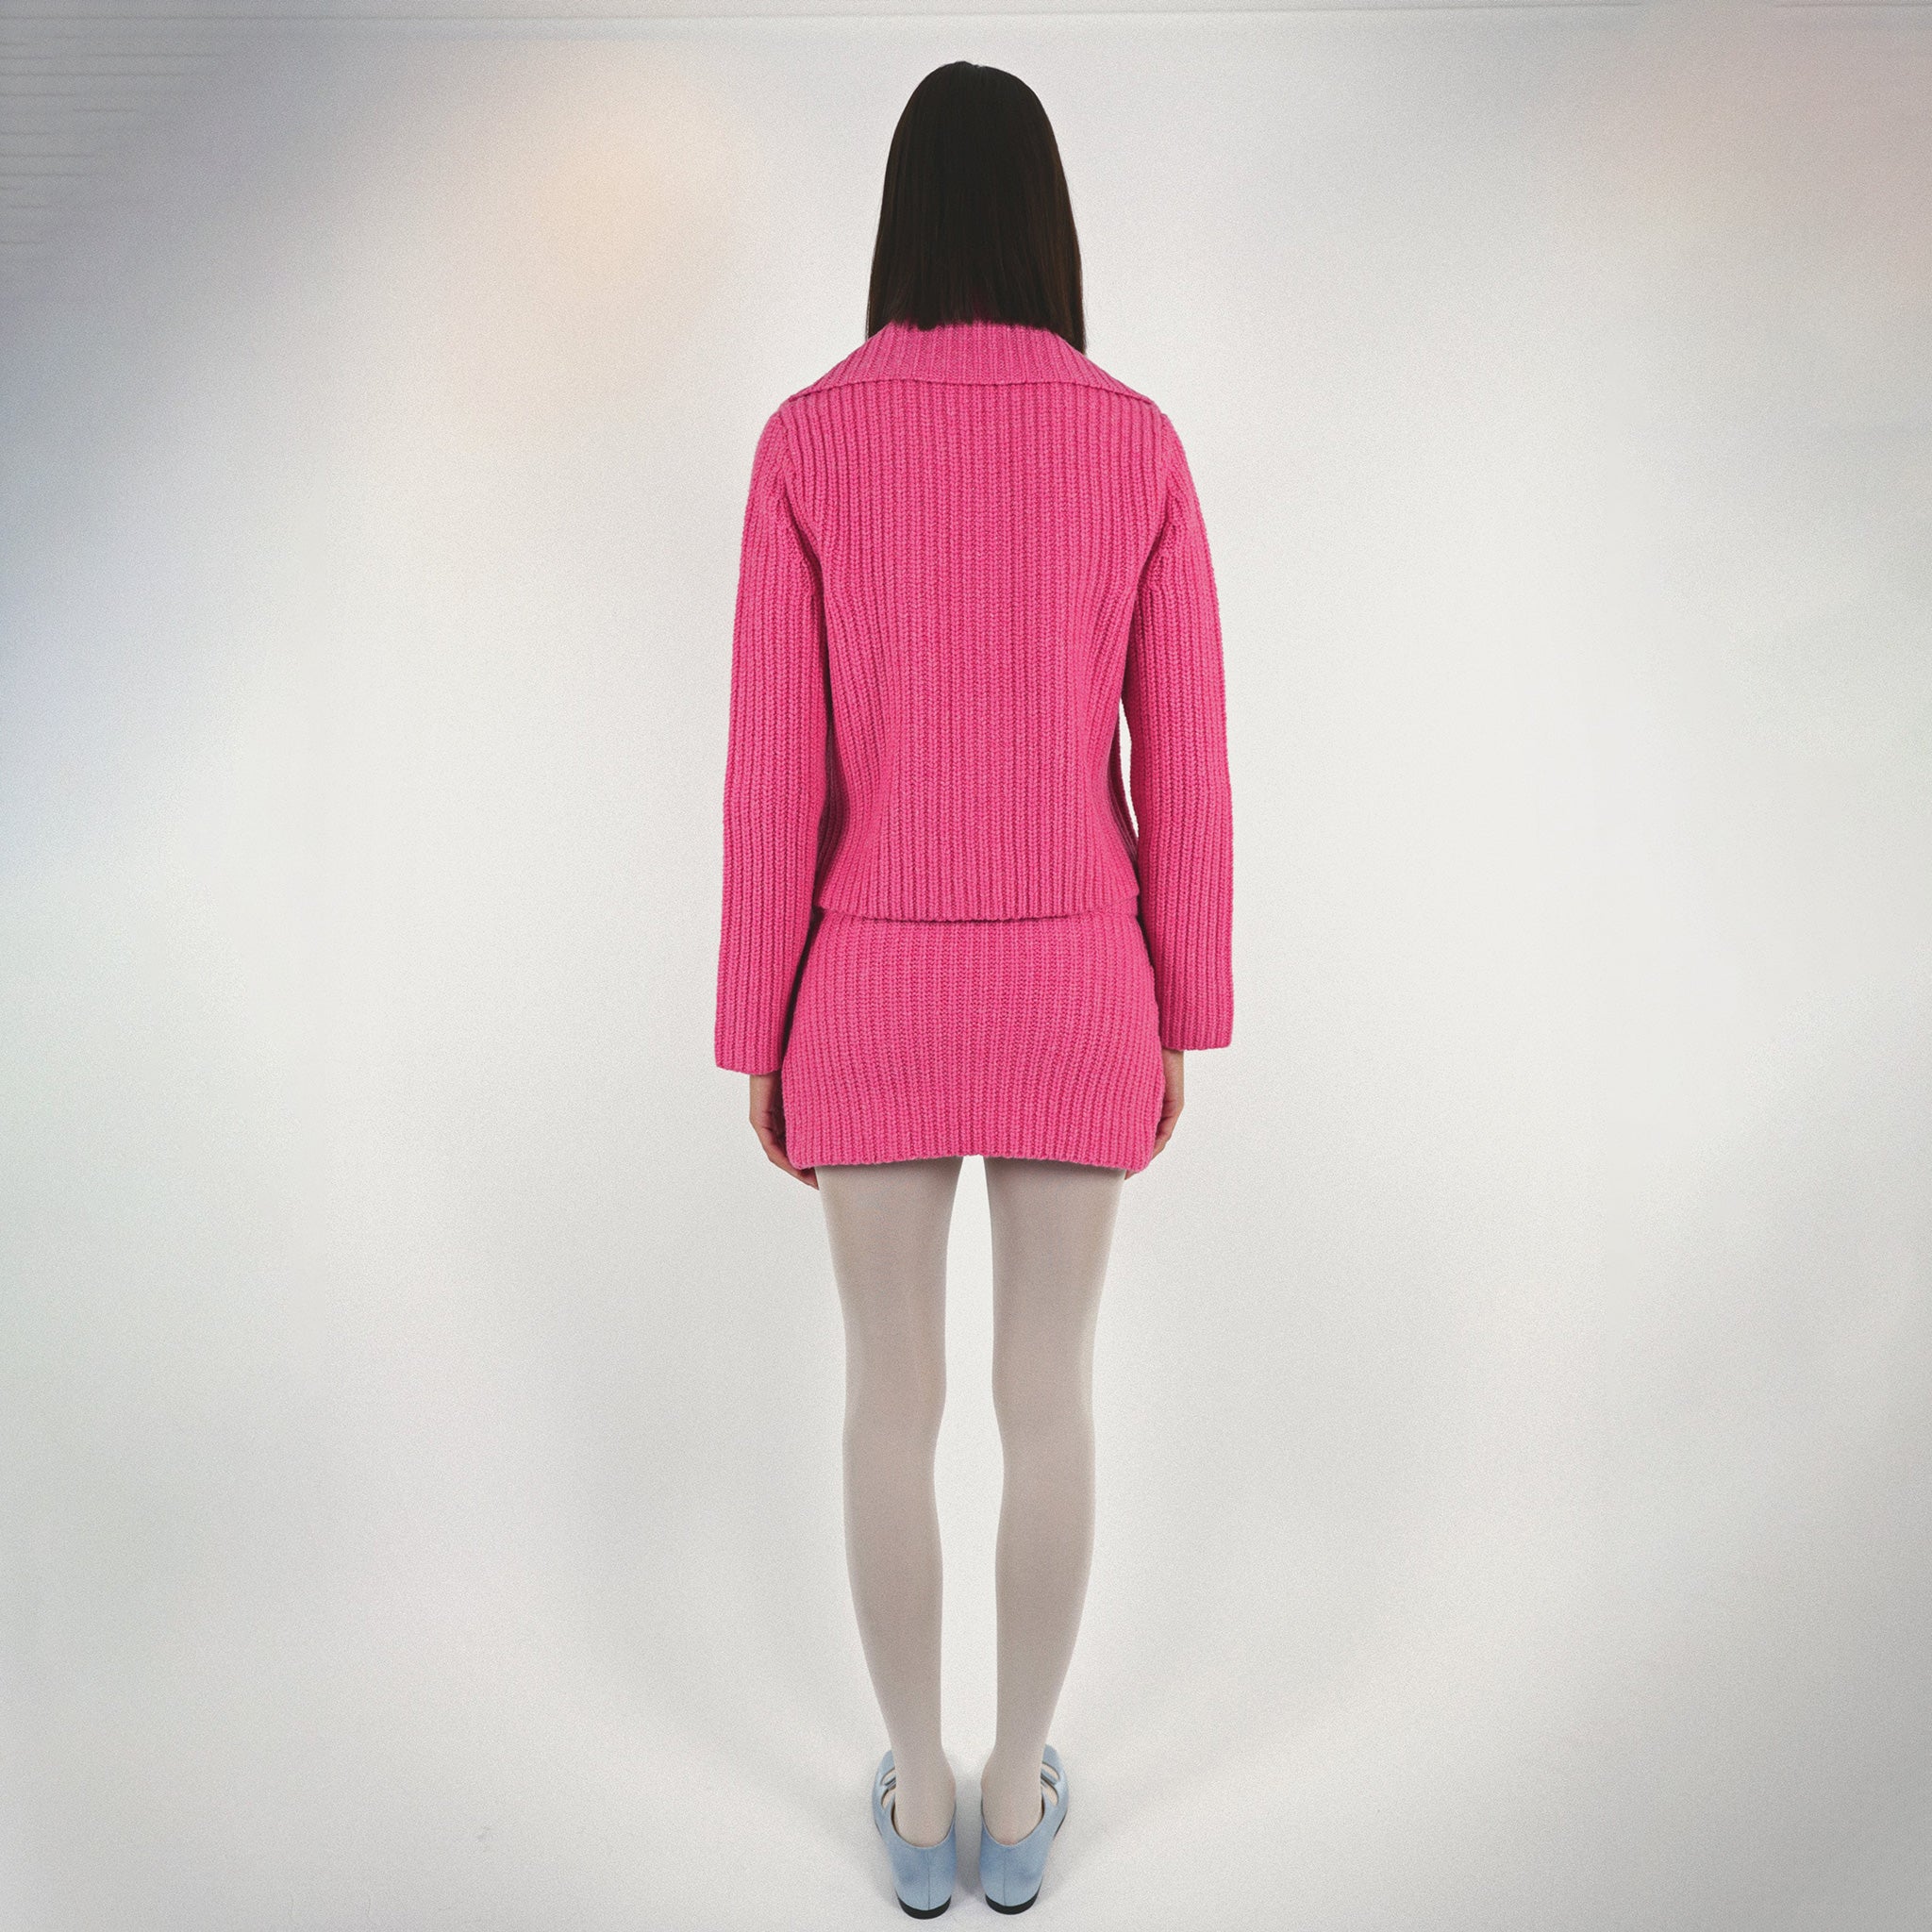 Back full body photo of model wearing a pink knit set featuring a button up sweater and a mini skirt.